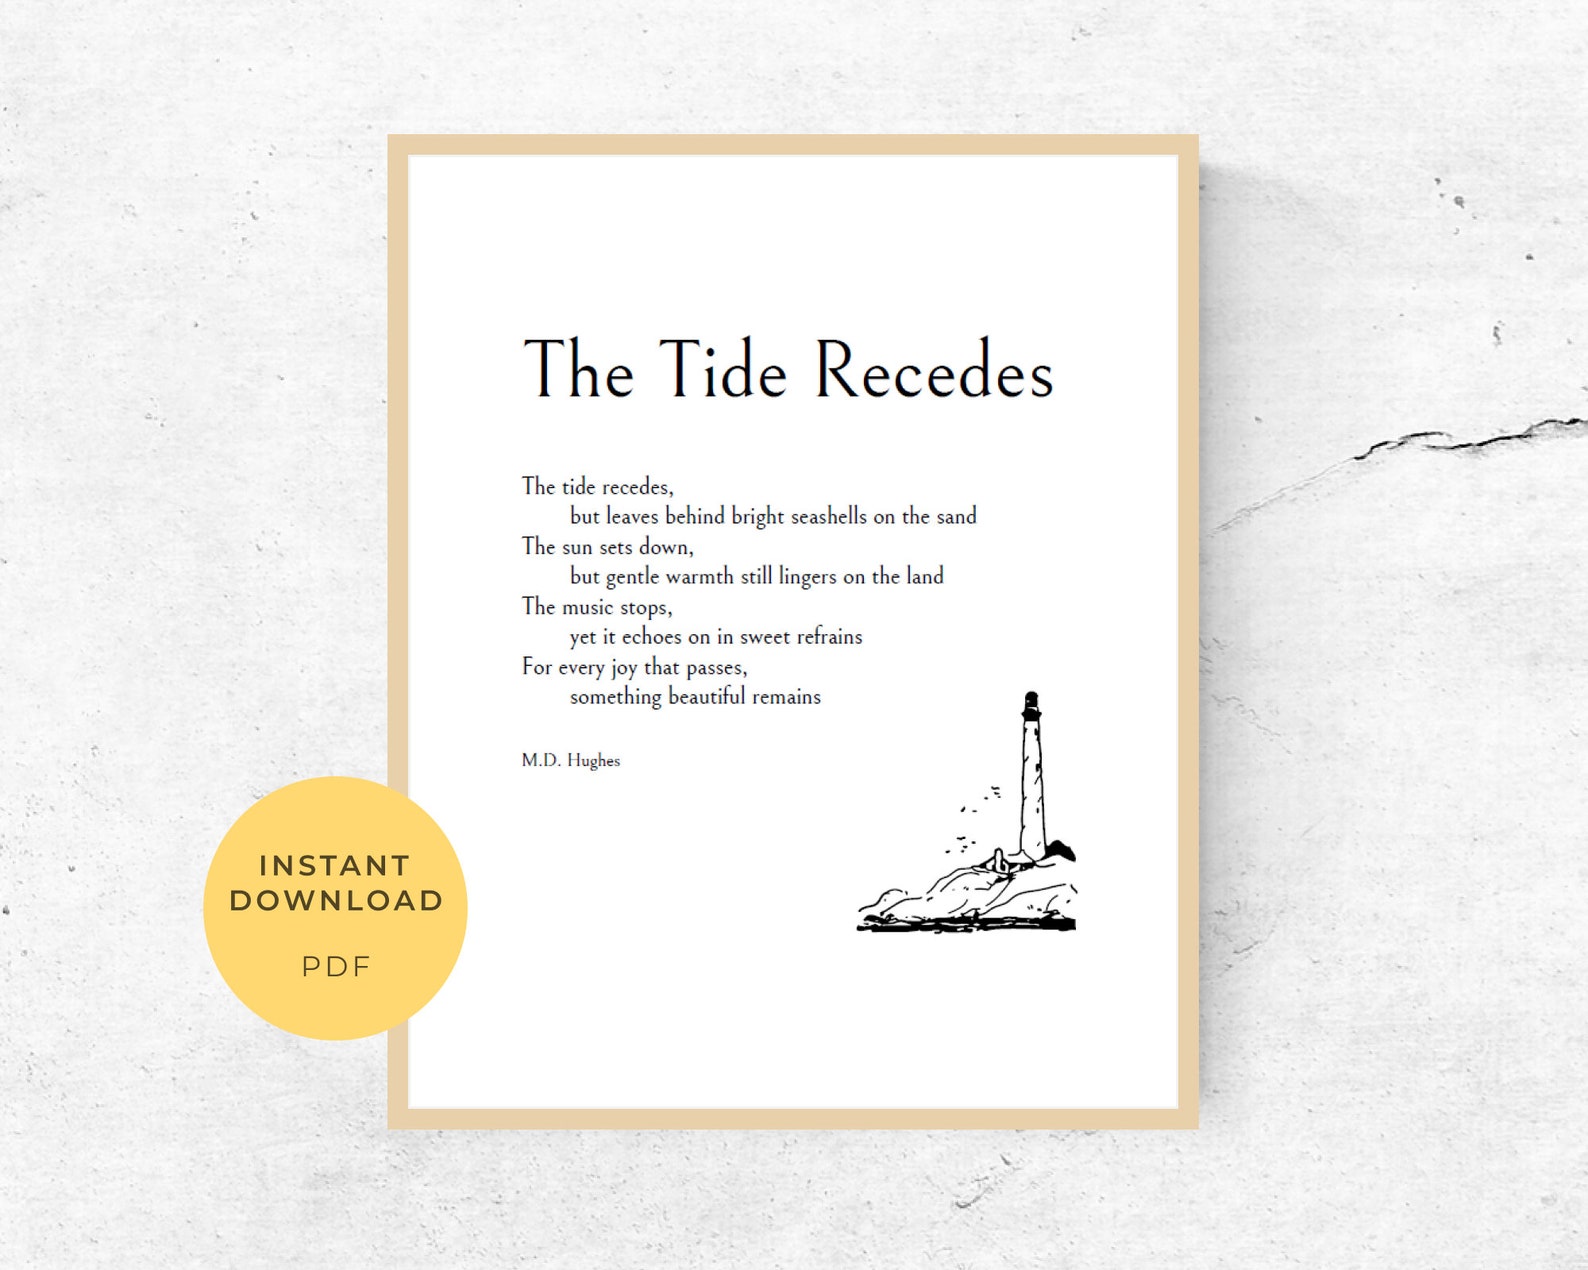 Recedes as the tide